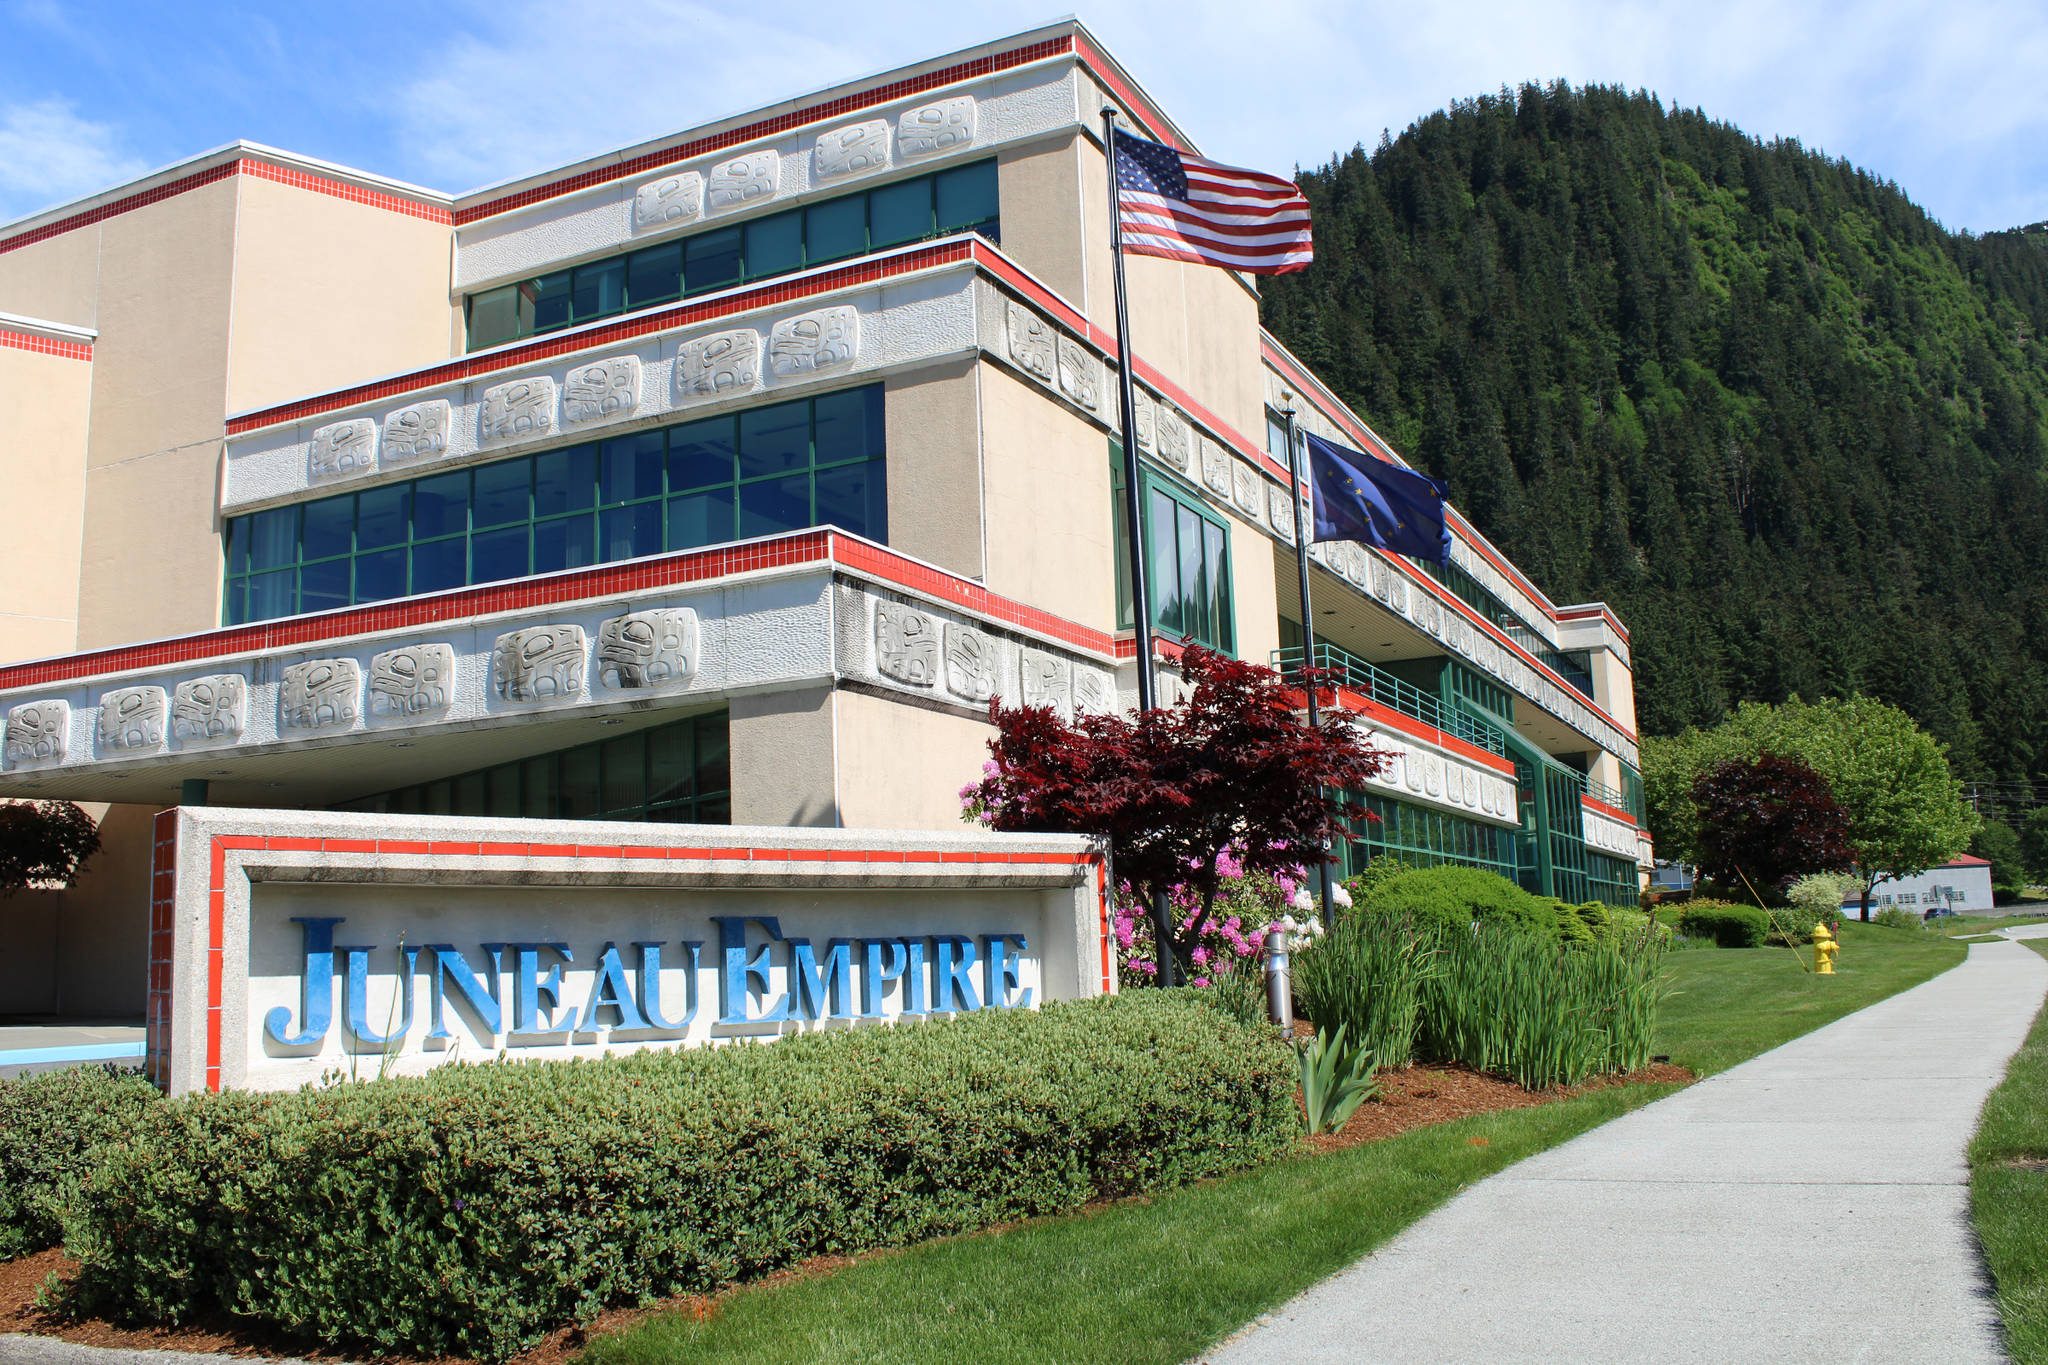 The Juneau Empire, offices seen here, is launching a new grant program to match advertisers’ purchases in an effort to help spur economic recovery. Grants will range from $500 to $20,000 in advertising credits, matching the client, and can be used for both print and digital advertising. The application for the grant is available at <a href="http://www.soundpublishing.com/grantapplication/" target="_blank">http://www.soundpublishing.com/grantapplication/</a>. (Ben Hohenstatt | Juneau Empire)